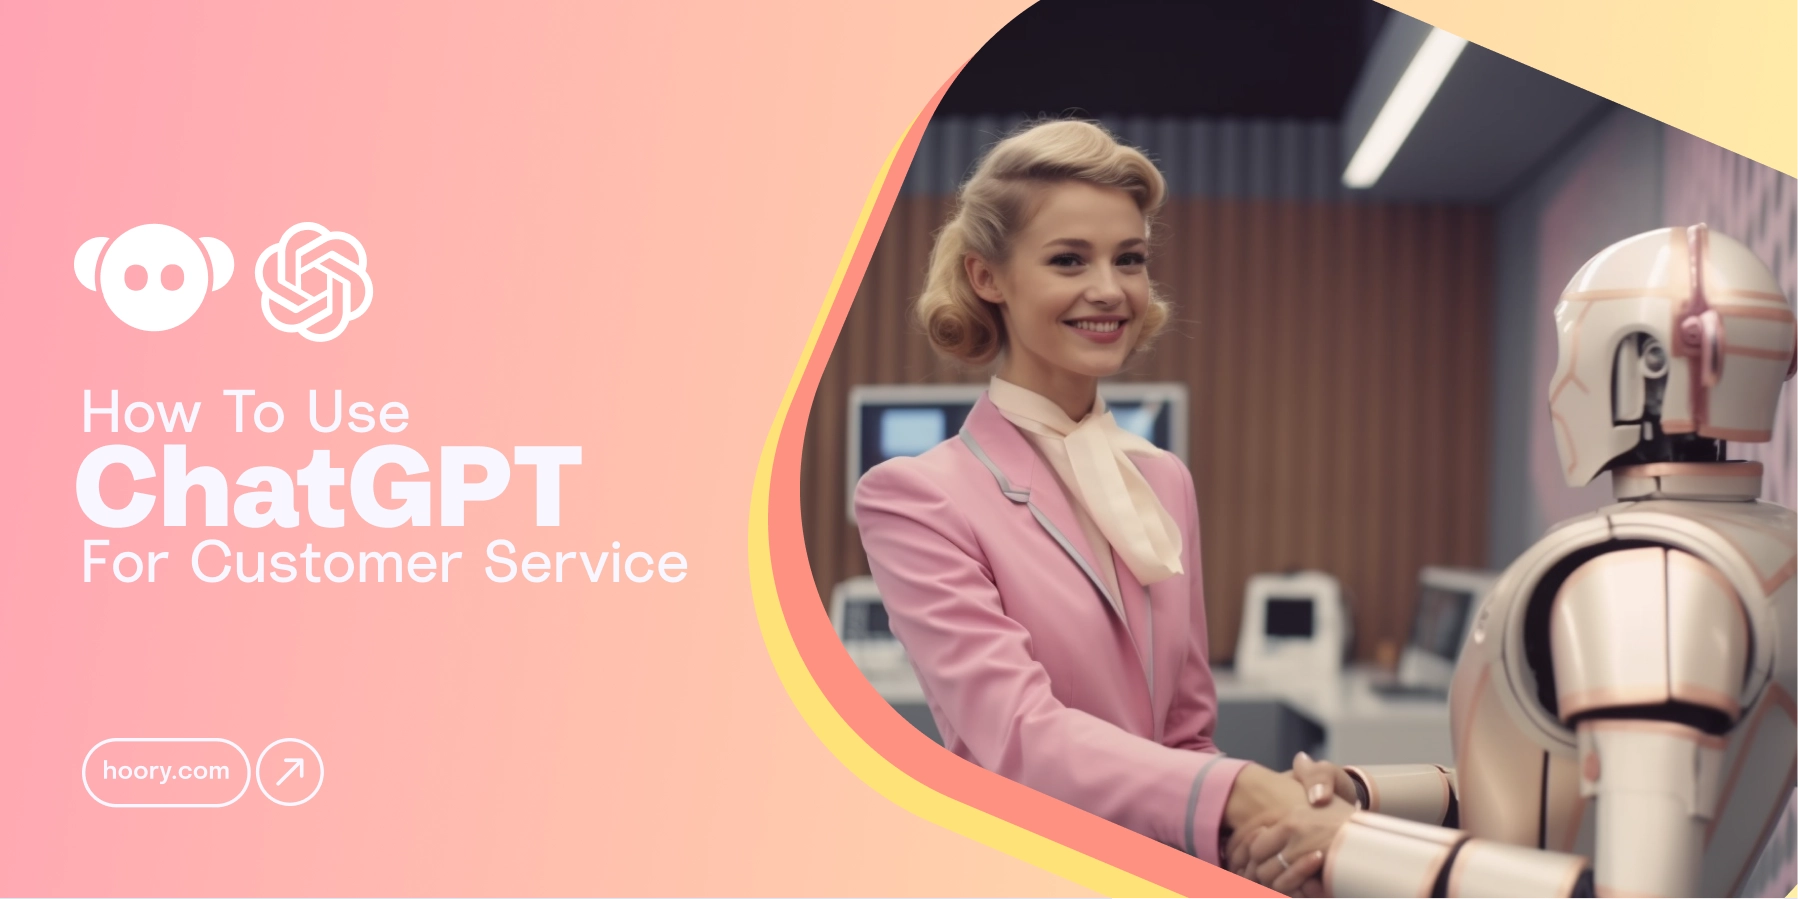 How To Use The Power of ChatGPT for Customer Service